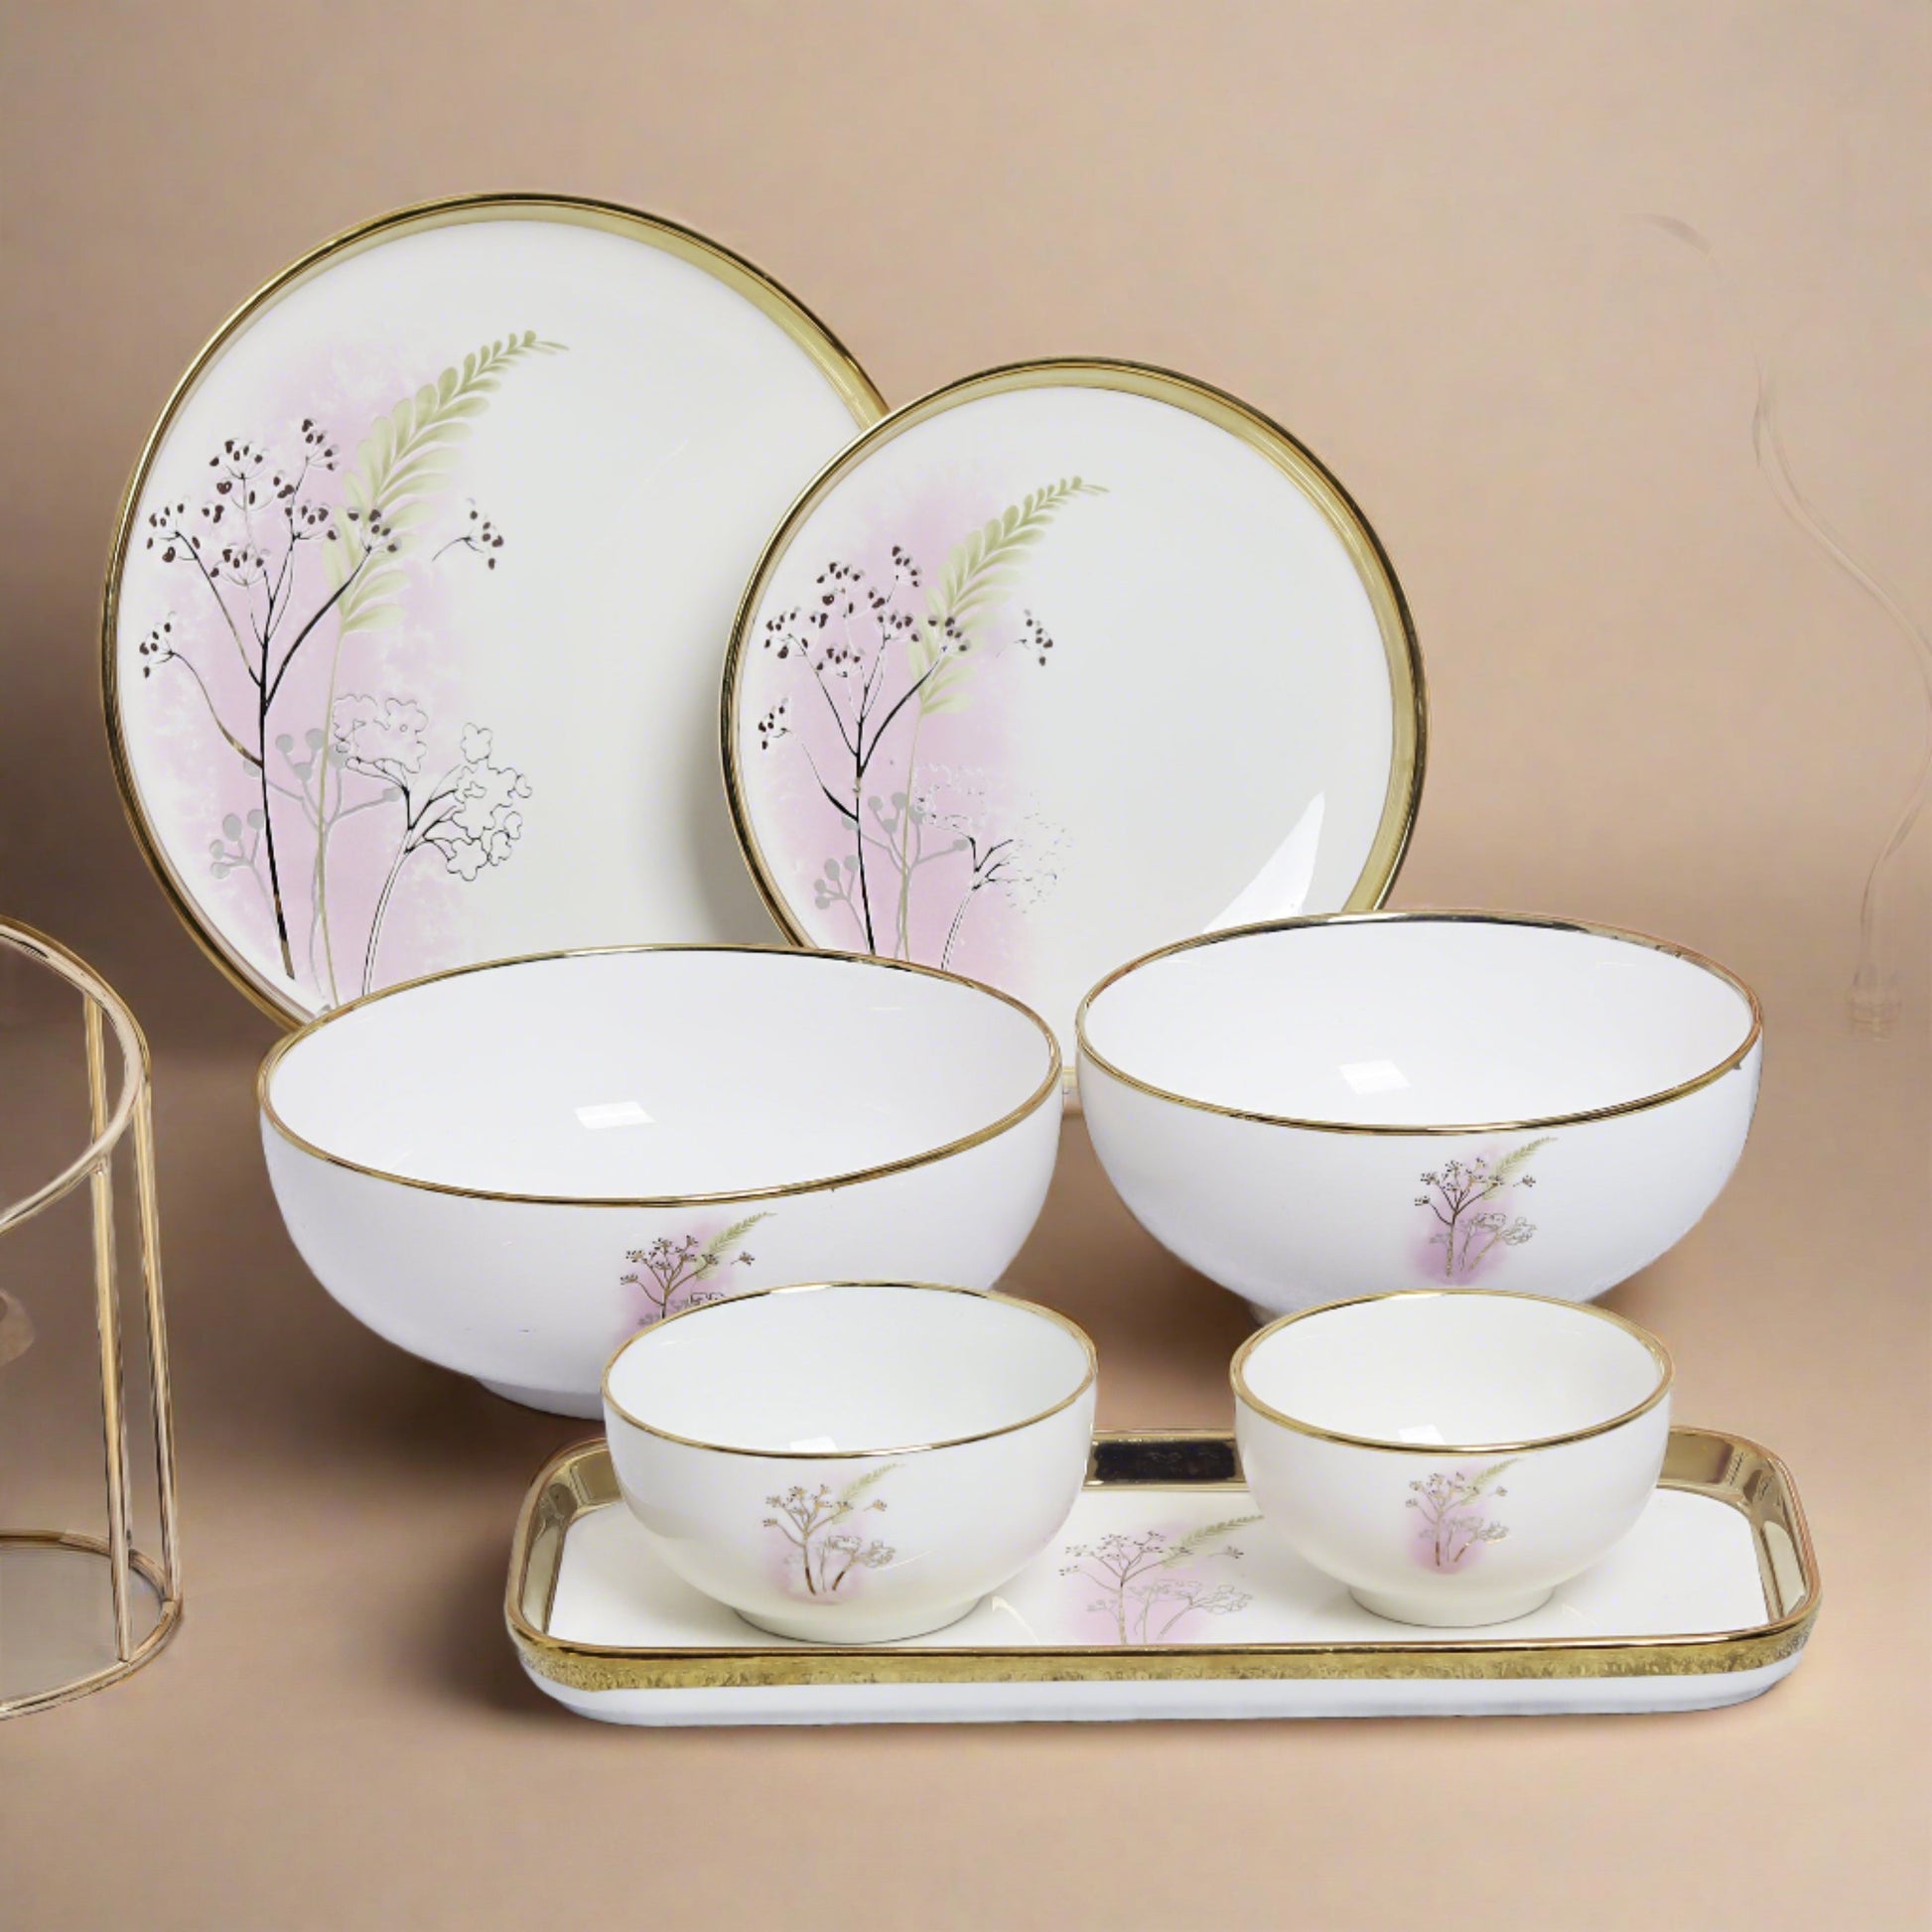 Complete 34-piece ceramic dinner set - ideal for elegant dining and entertaining